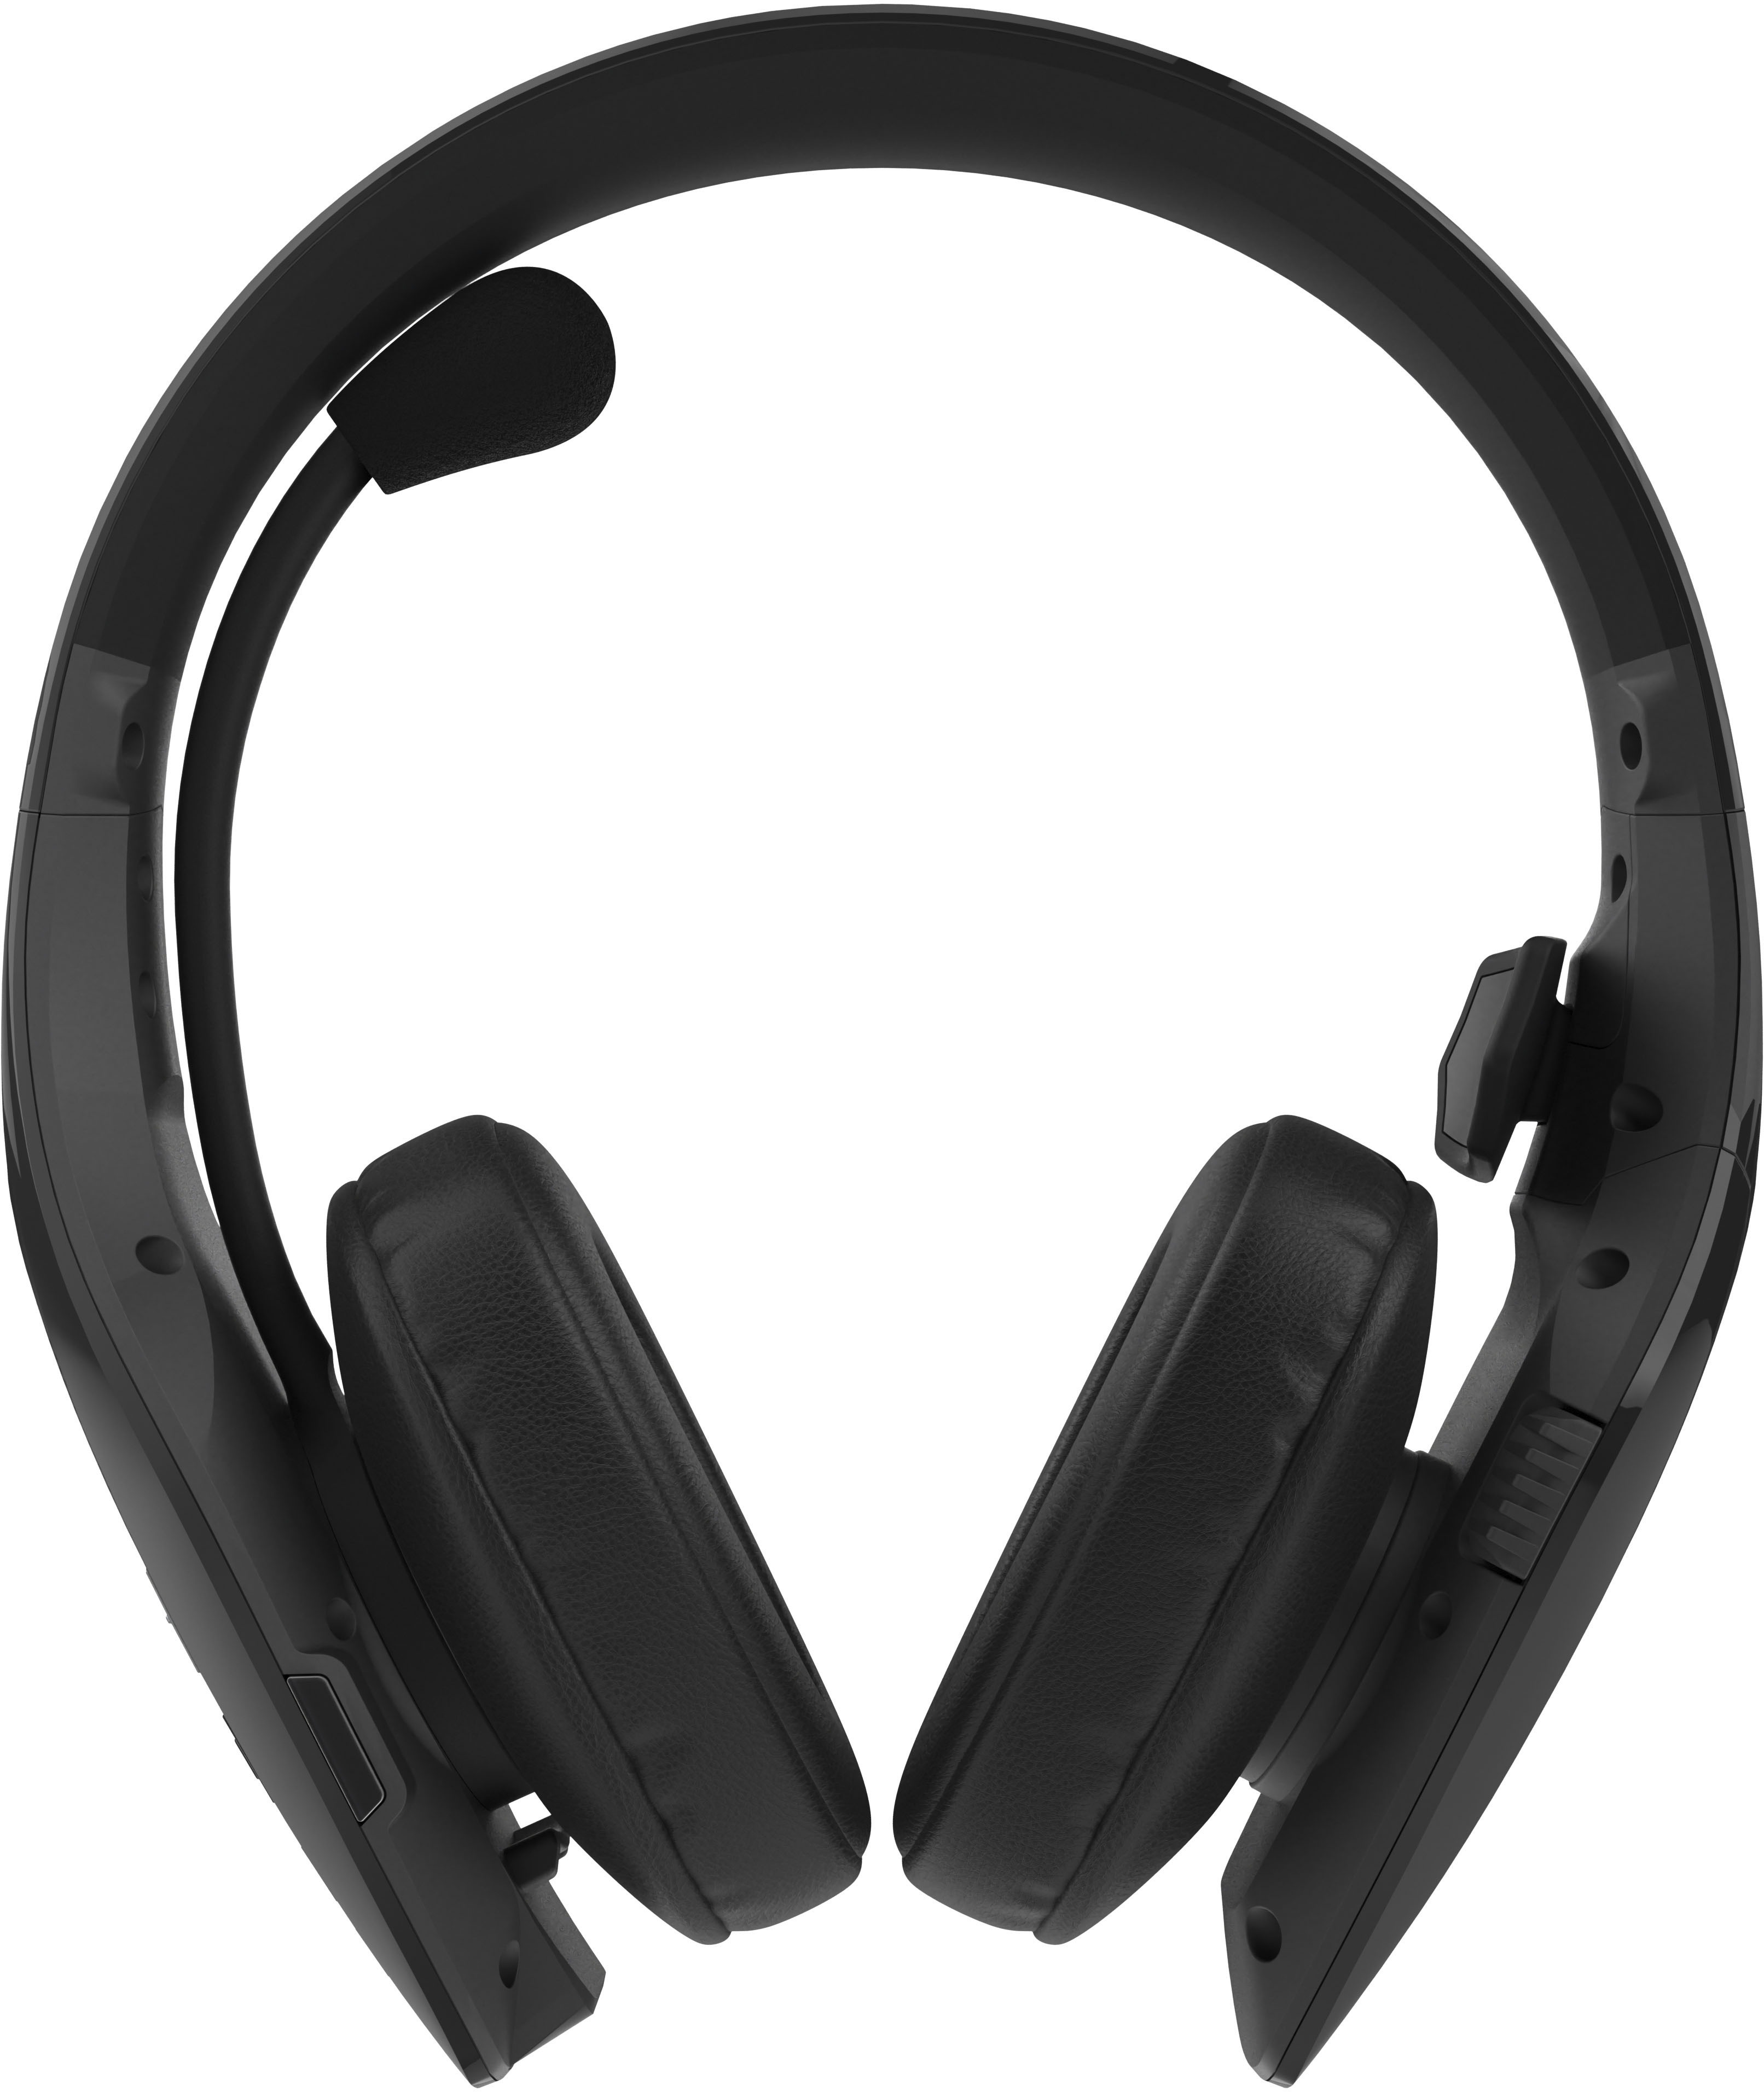 BlueParrott S650-XT 2-in1 Convertible - Best Black Noise 204292 Active Cancellation Wireless with Headset Buy